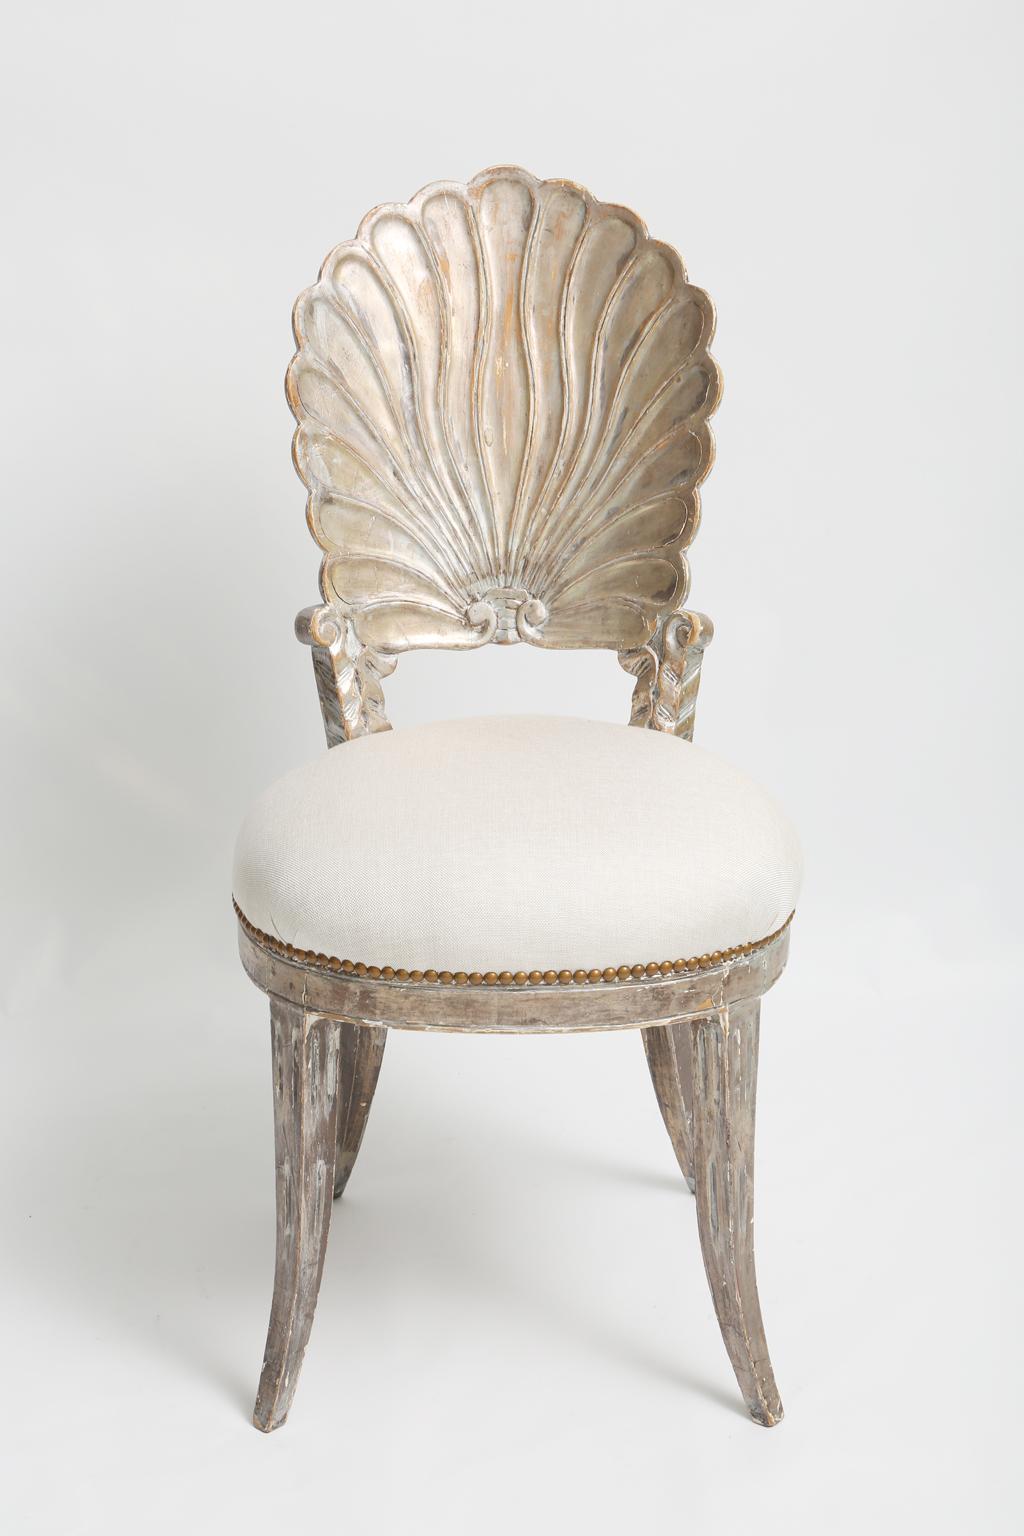 Single grotto style side chair, having a silver gilt finish showing natural wear, its back hand carved as a scallop shell, to a round, stuff-over seat of linen with nailheads, raised on sabre legs.

Stock ID: D2090.